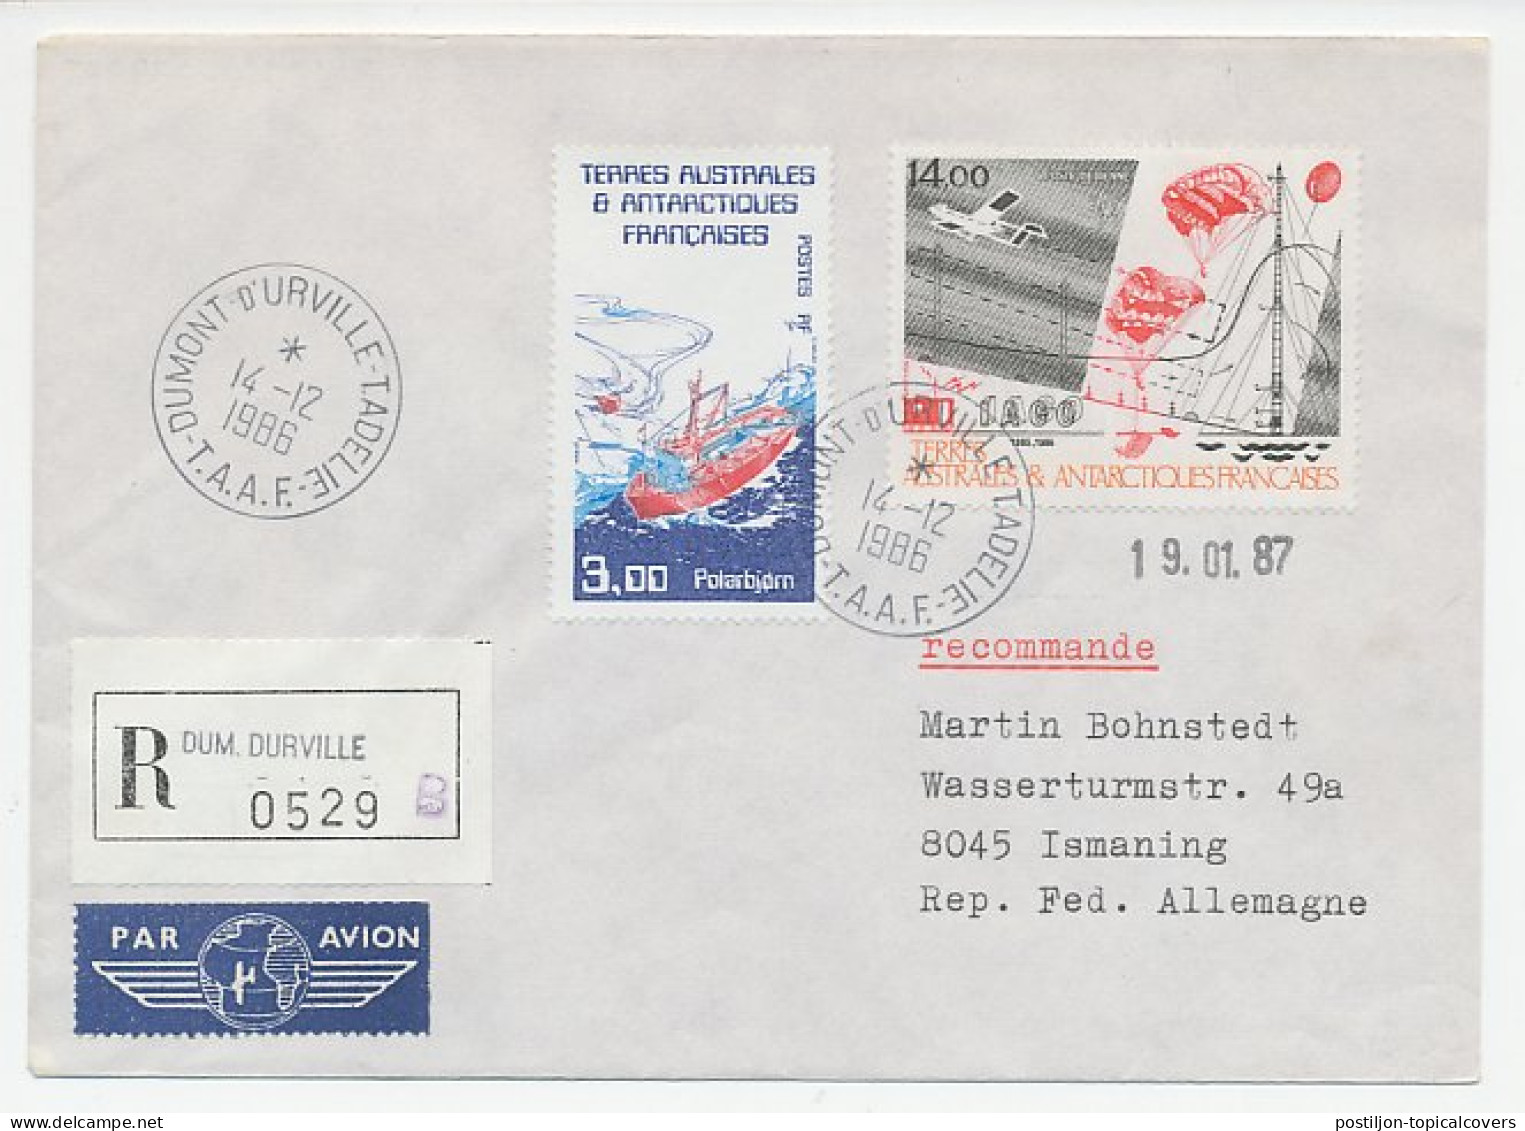 Registered Cover French Southern And Antarctic Territories 10.00 - Arctic Expeditions